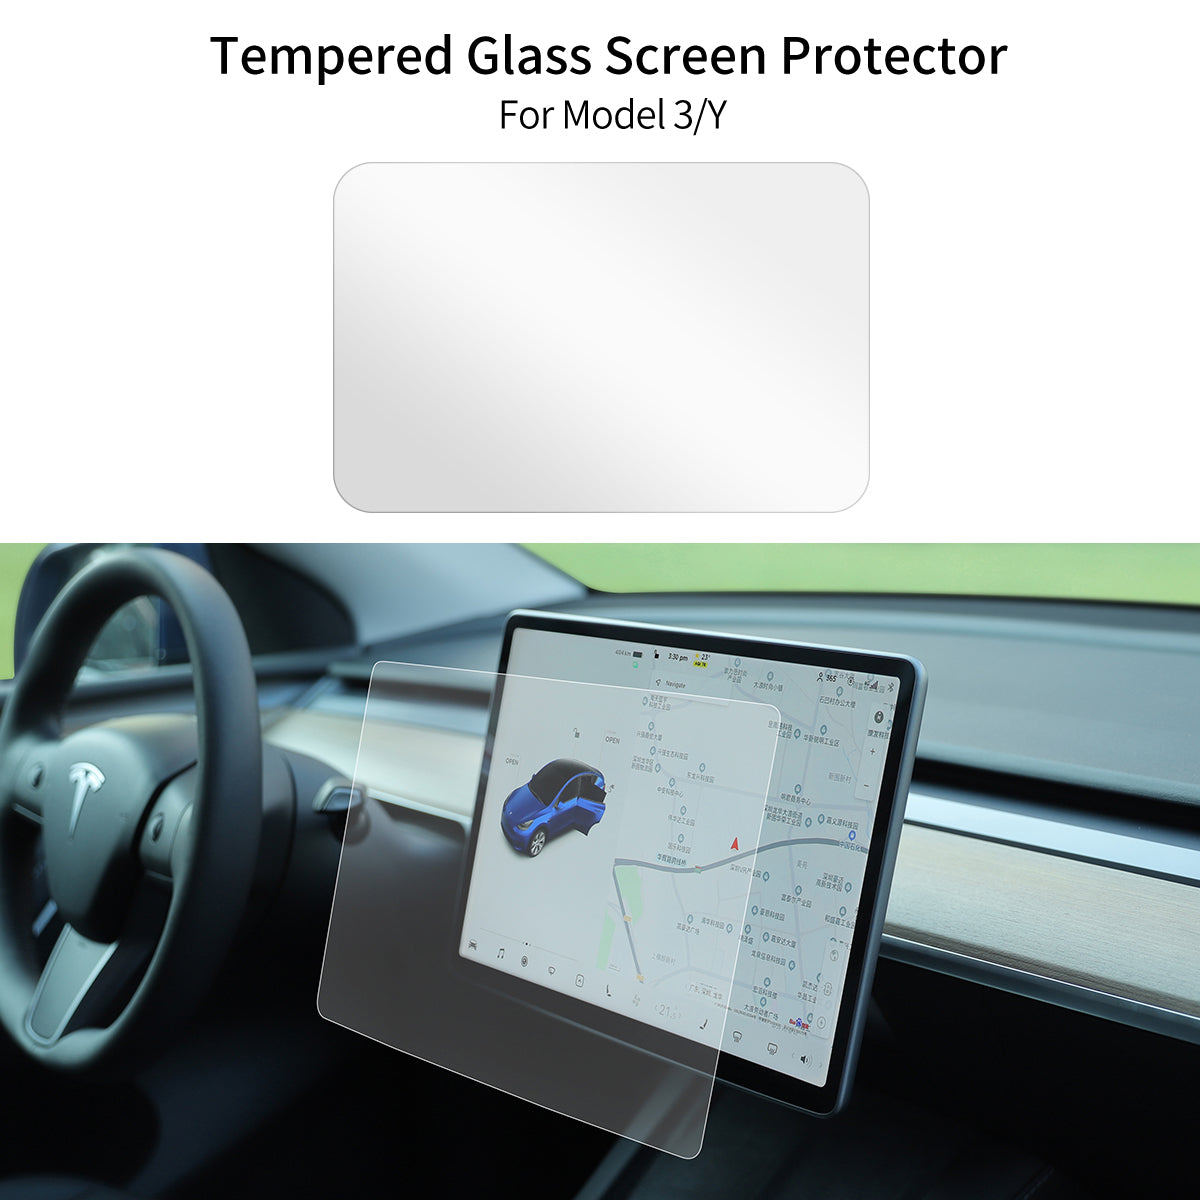 TPARTS Tempered Glass Screen Protector for Model 3 & Y, Glossy